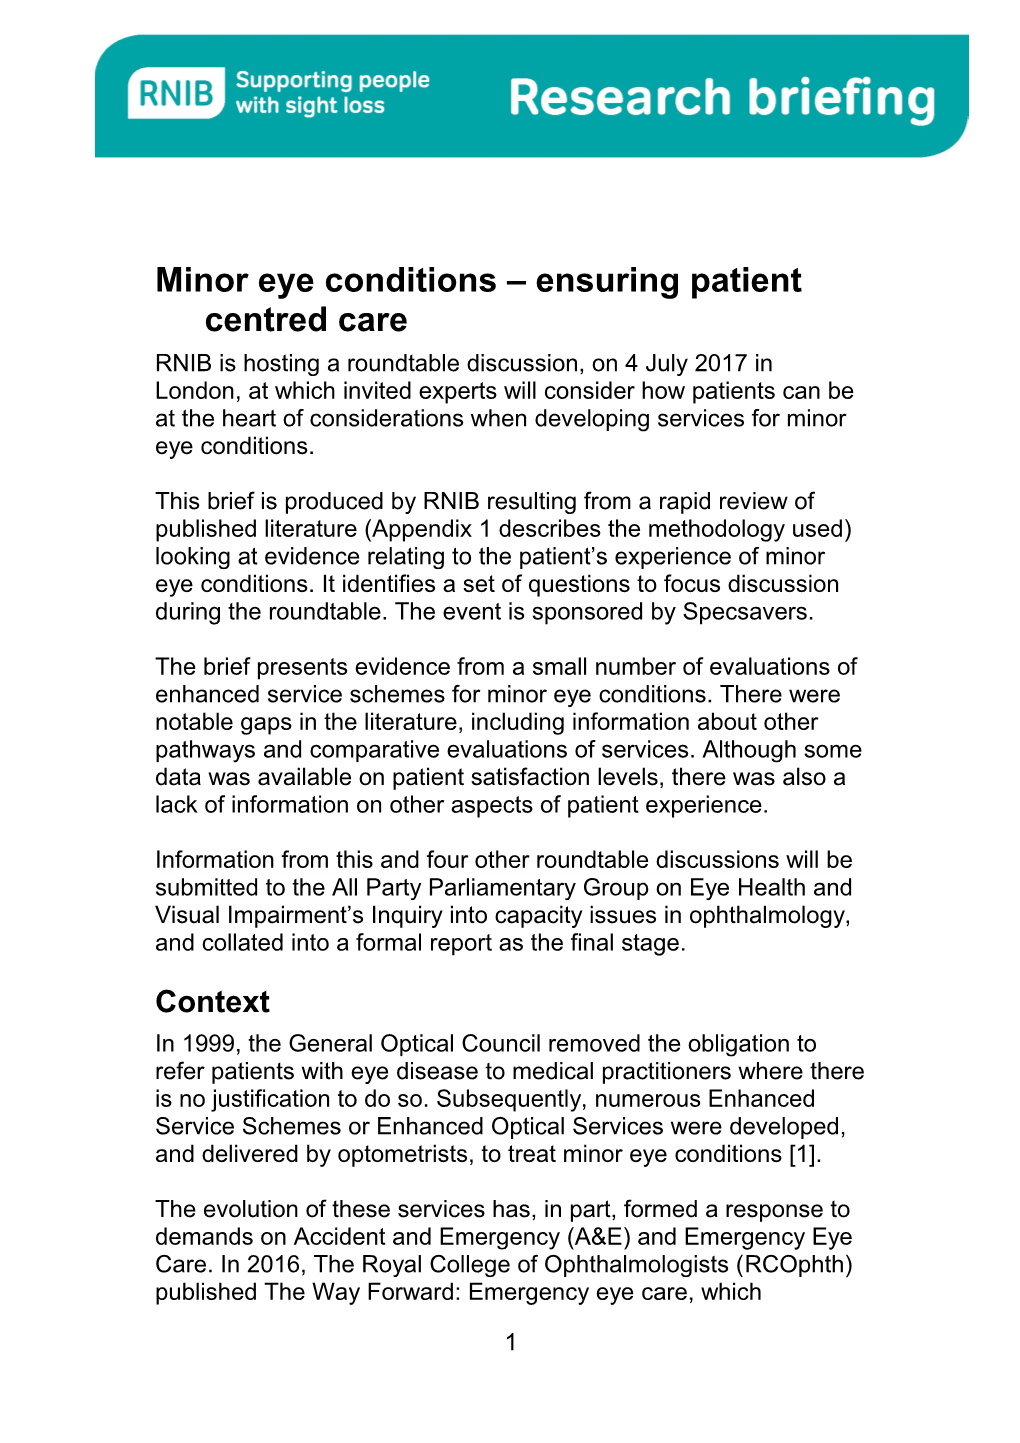 Minor Eye Conditions Ensuring Patient Centred Care